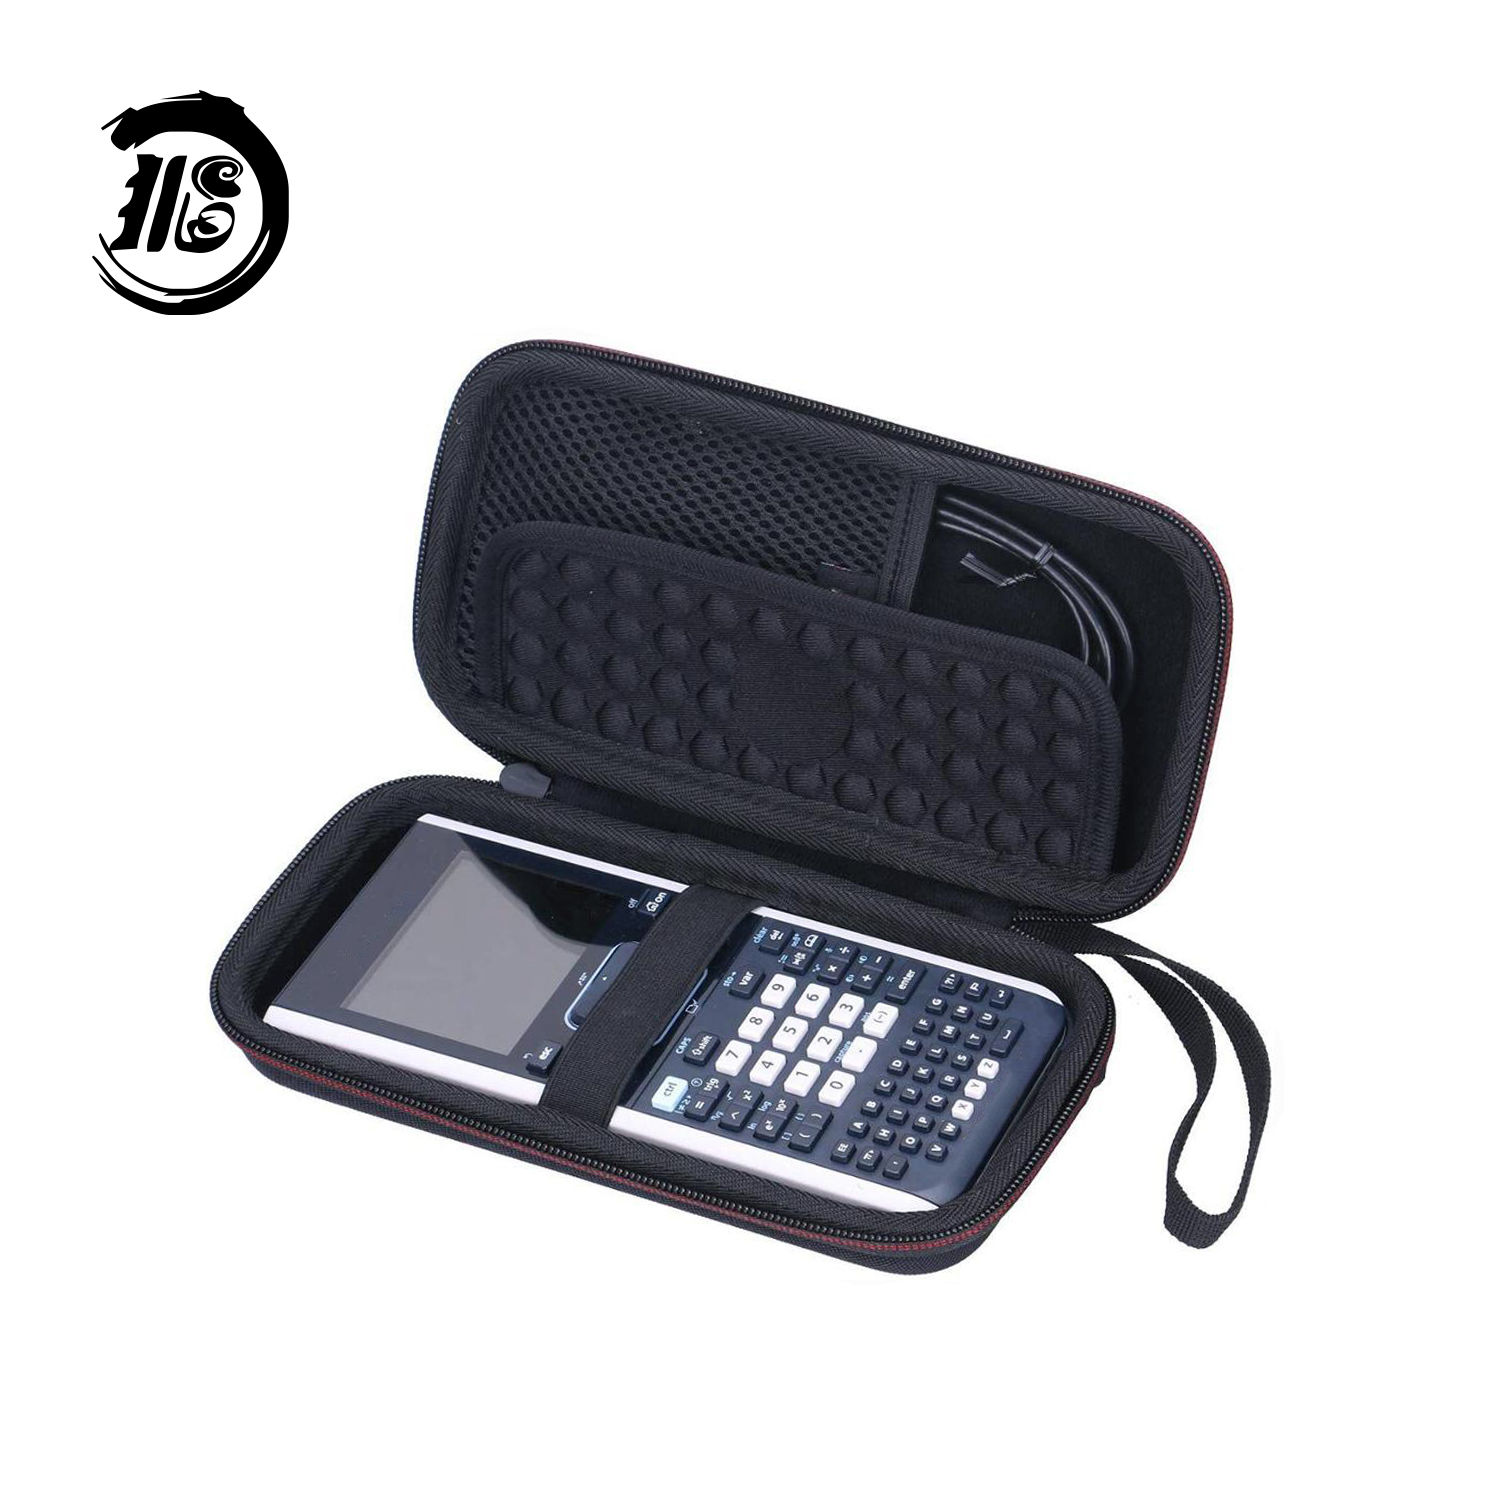 Portable Carry Case EVA Hard Case Travel Case for Electronic Calculator and Accessories